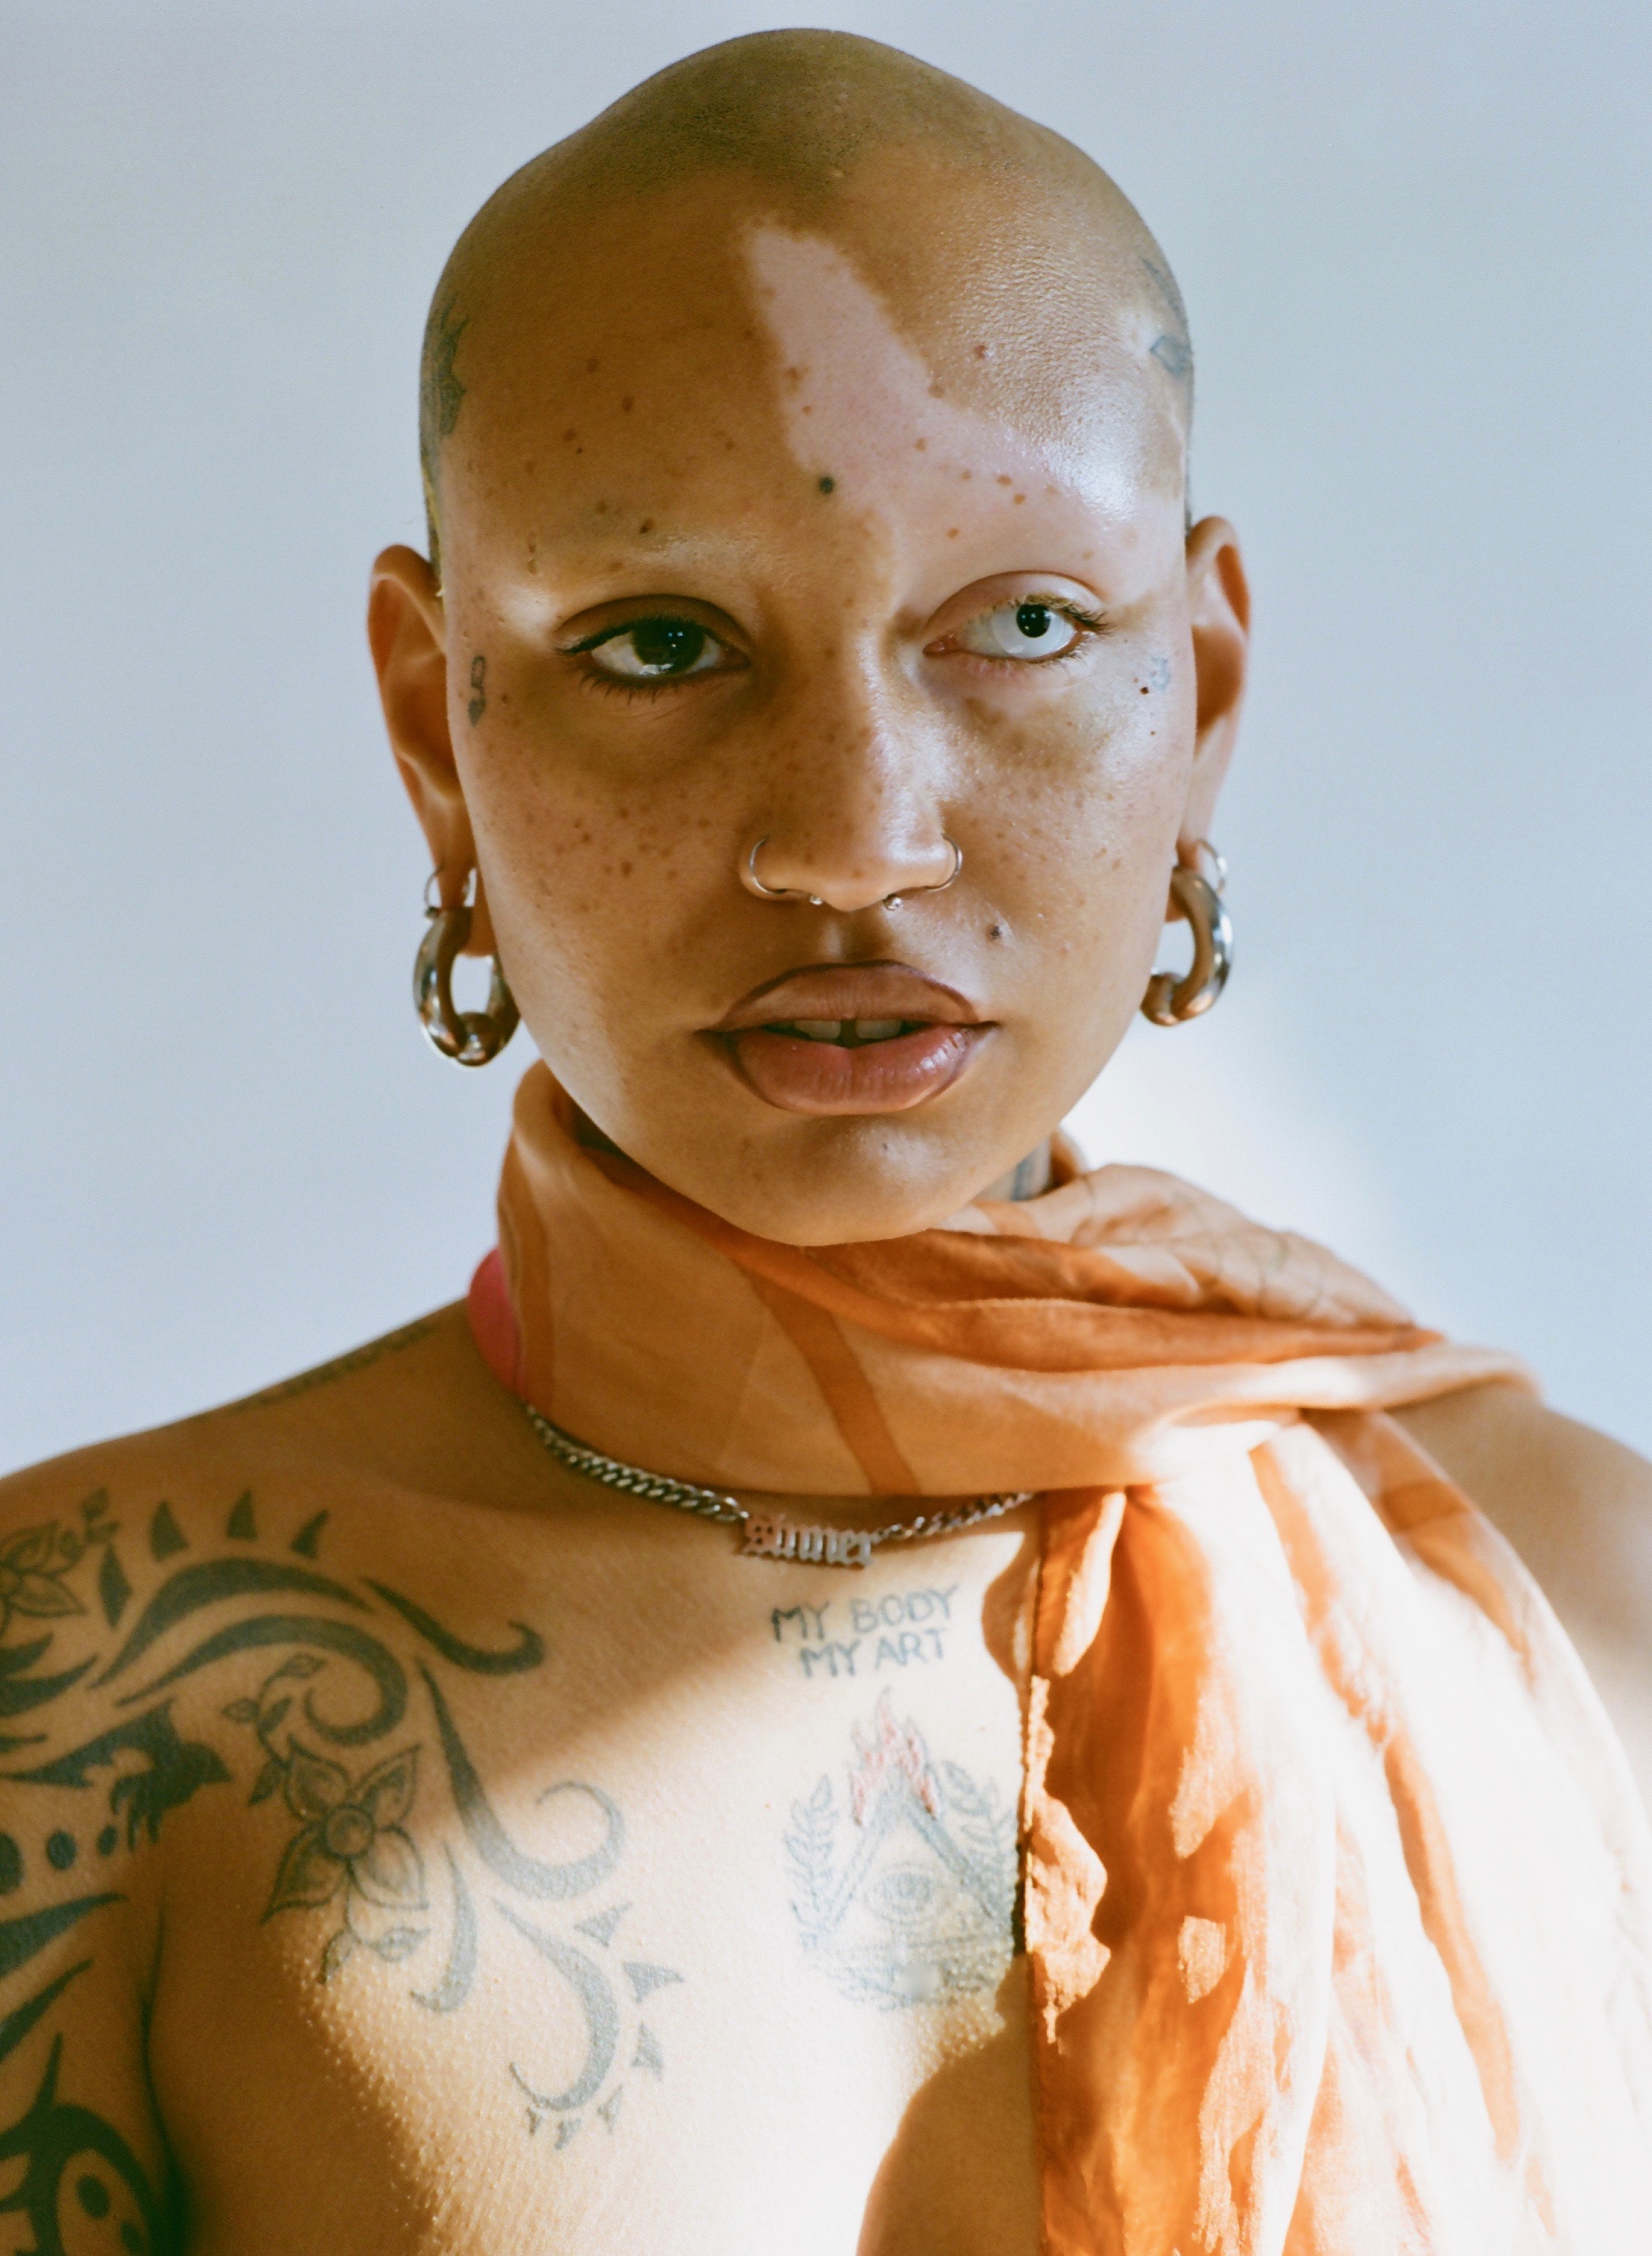 Portrait of a model with tattoos on body, an orange scarf and chain necklace.